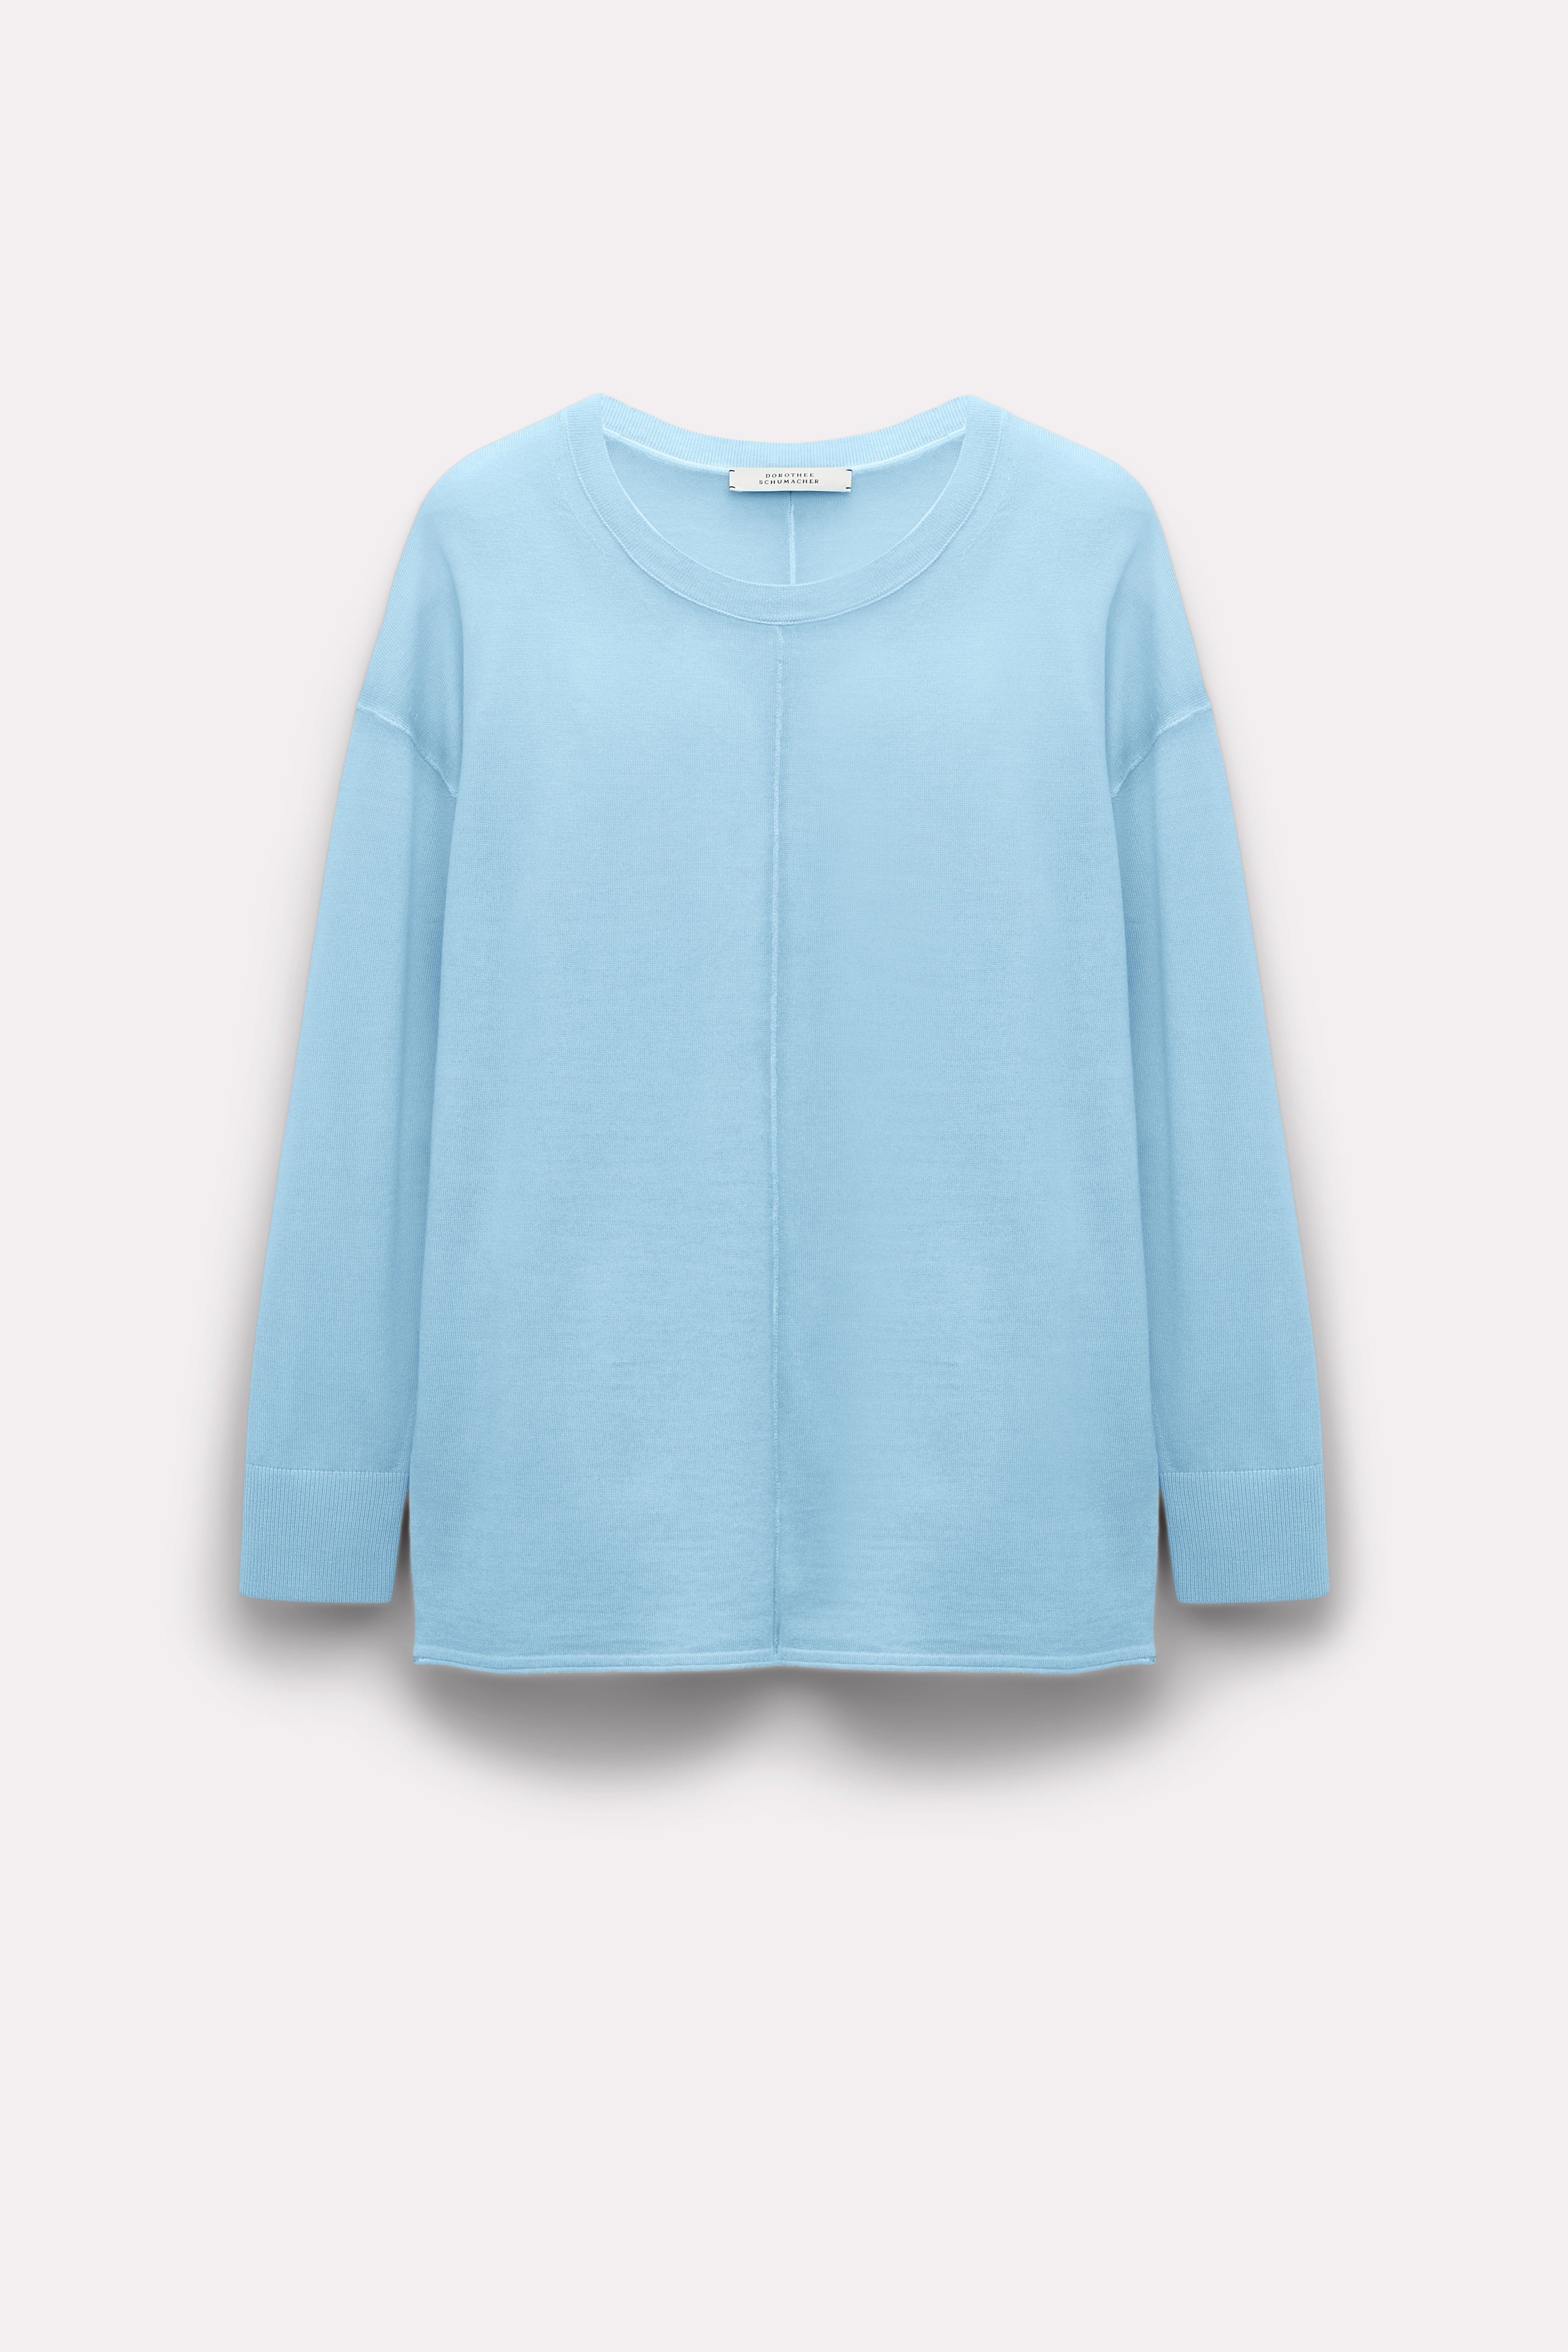 Dorothee-Schumacher-OUTLET-SALE-ESSENTIAL-TWIST-pullover-Strick-ARCHIVE-COLLECTION_503dfc90-73cf-4772-a8b1-209faee6f053.jpg